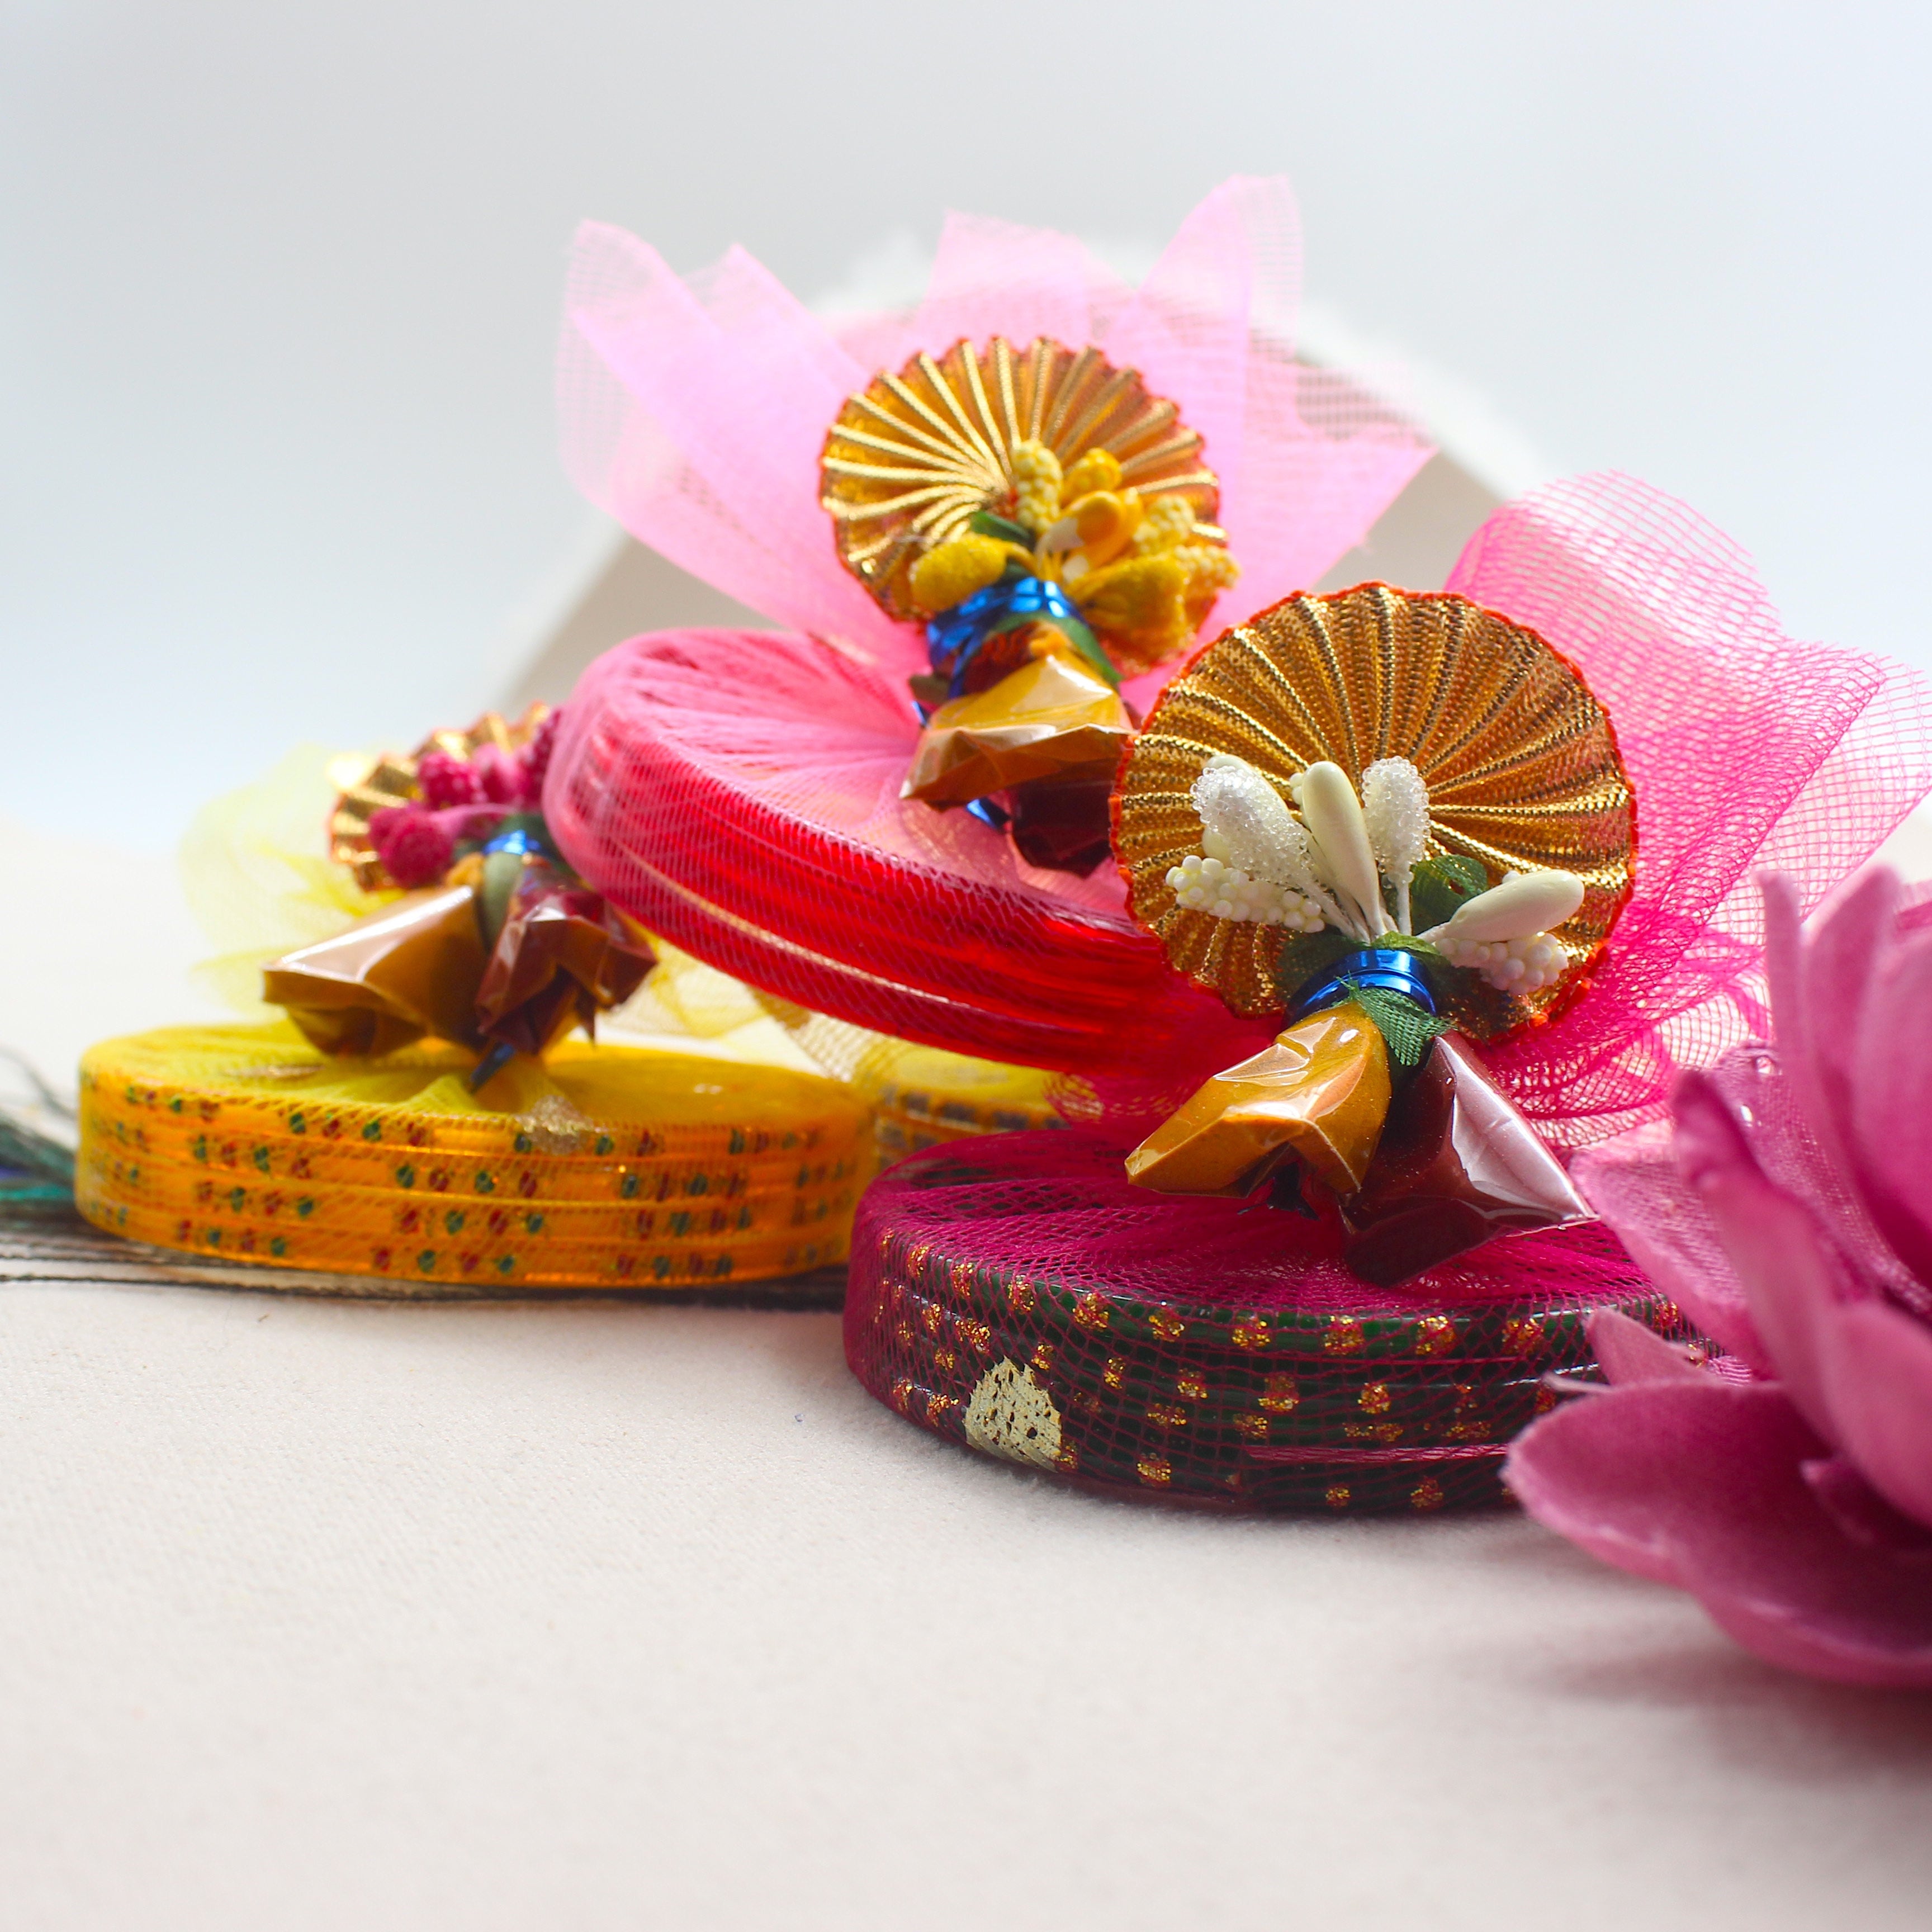 Buy Bulk Indian return gifts Online in US from Desifavors